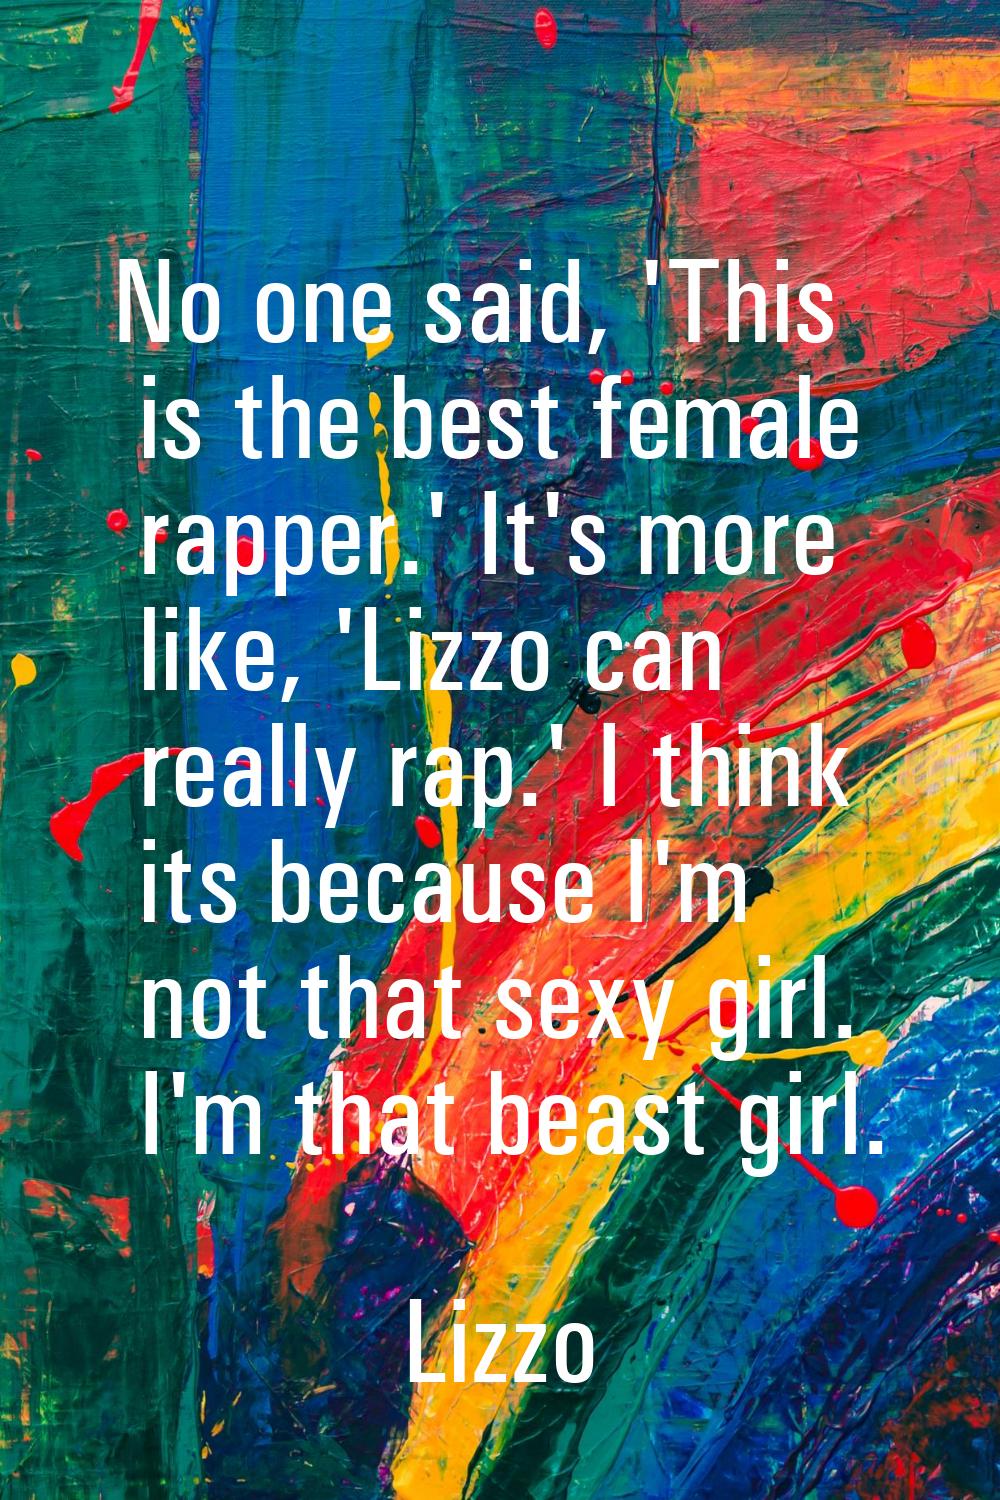 No one said, 'This is the best female rapper.' It's more like, 'Lizzo can really rap.' I think its 